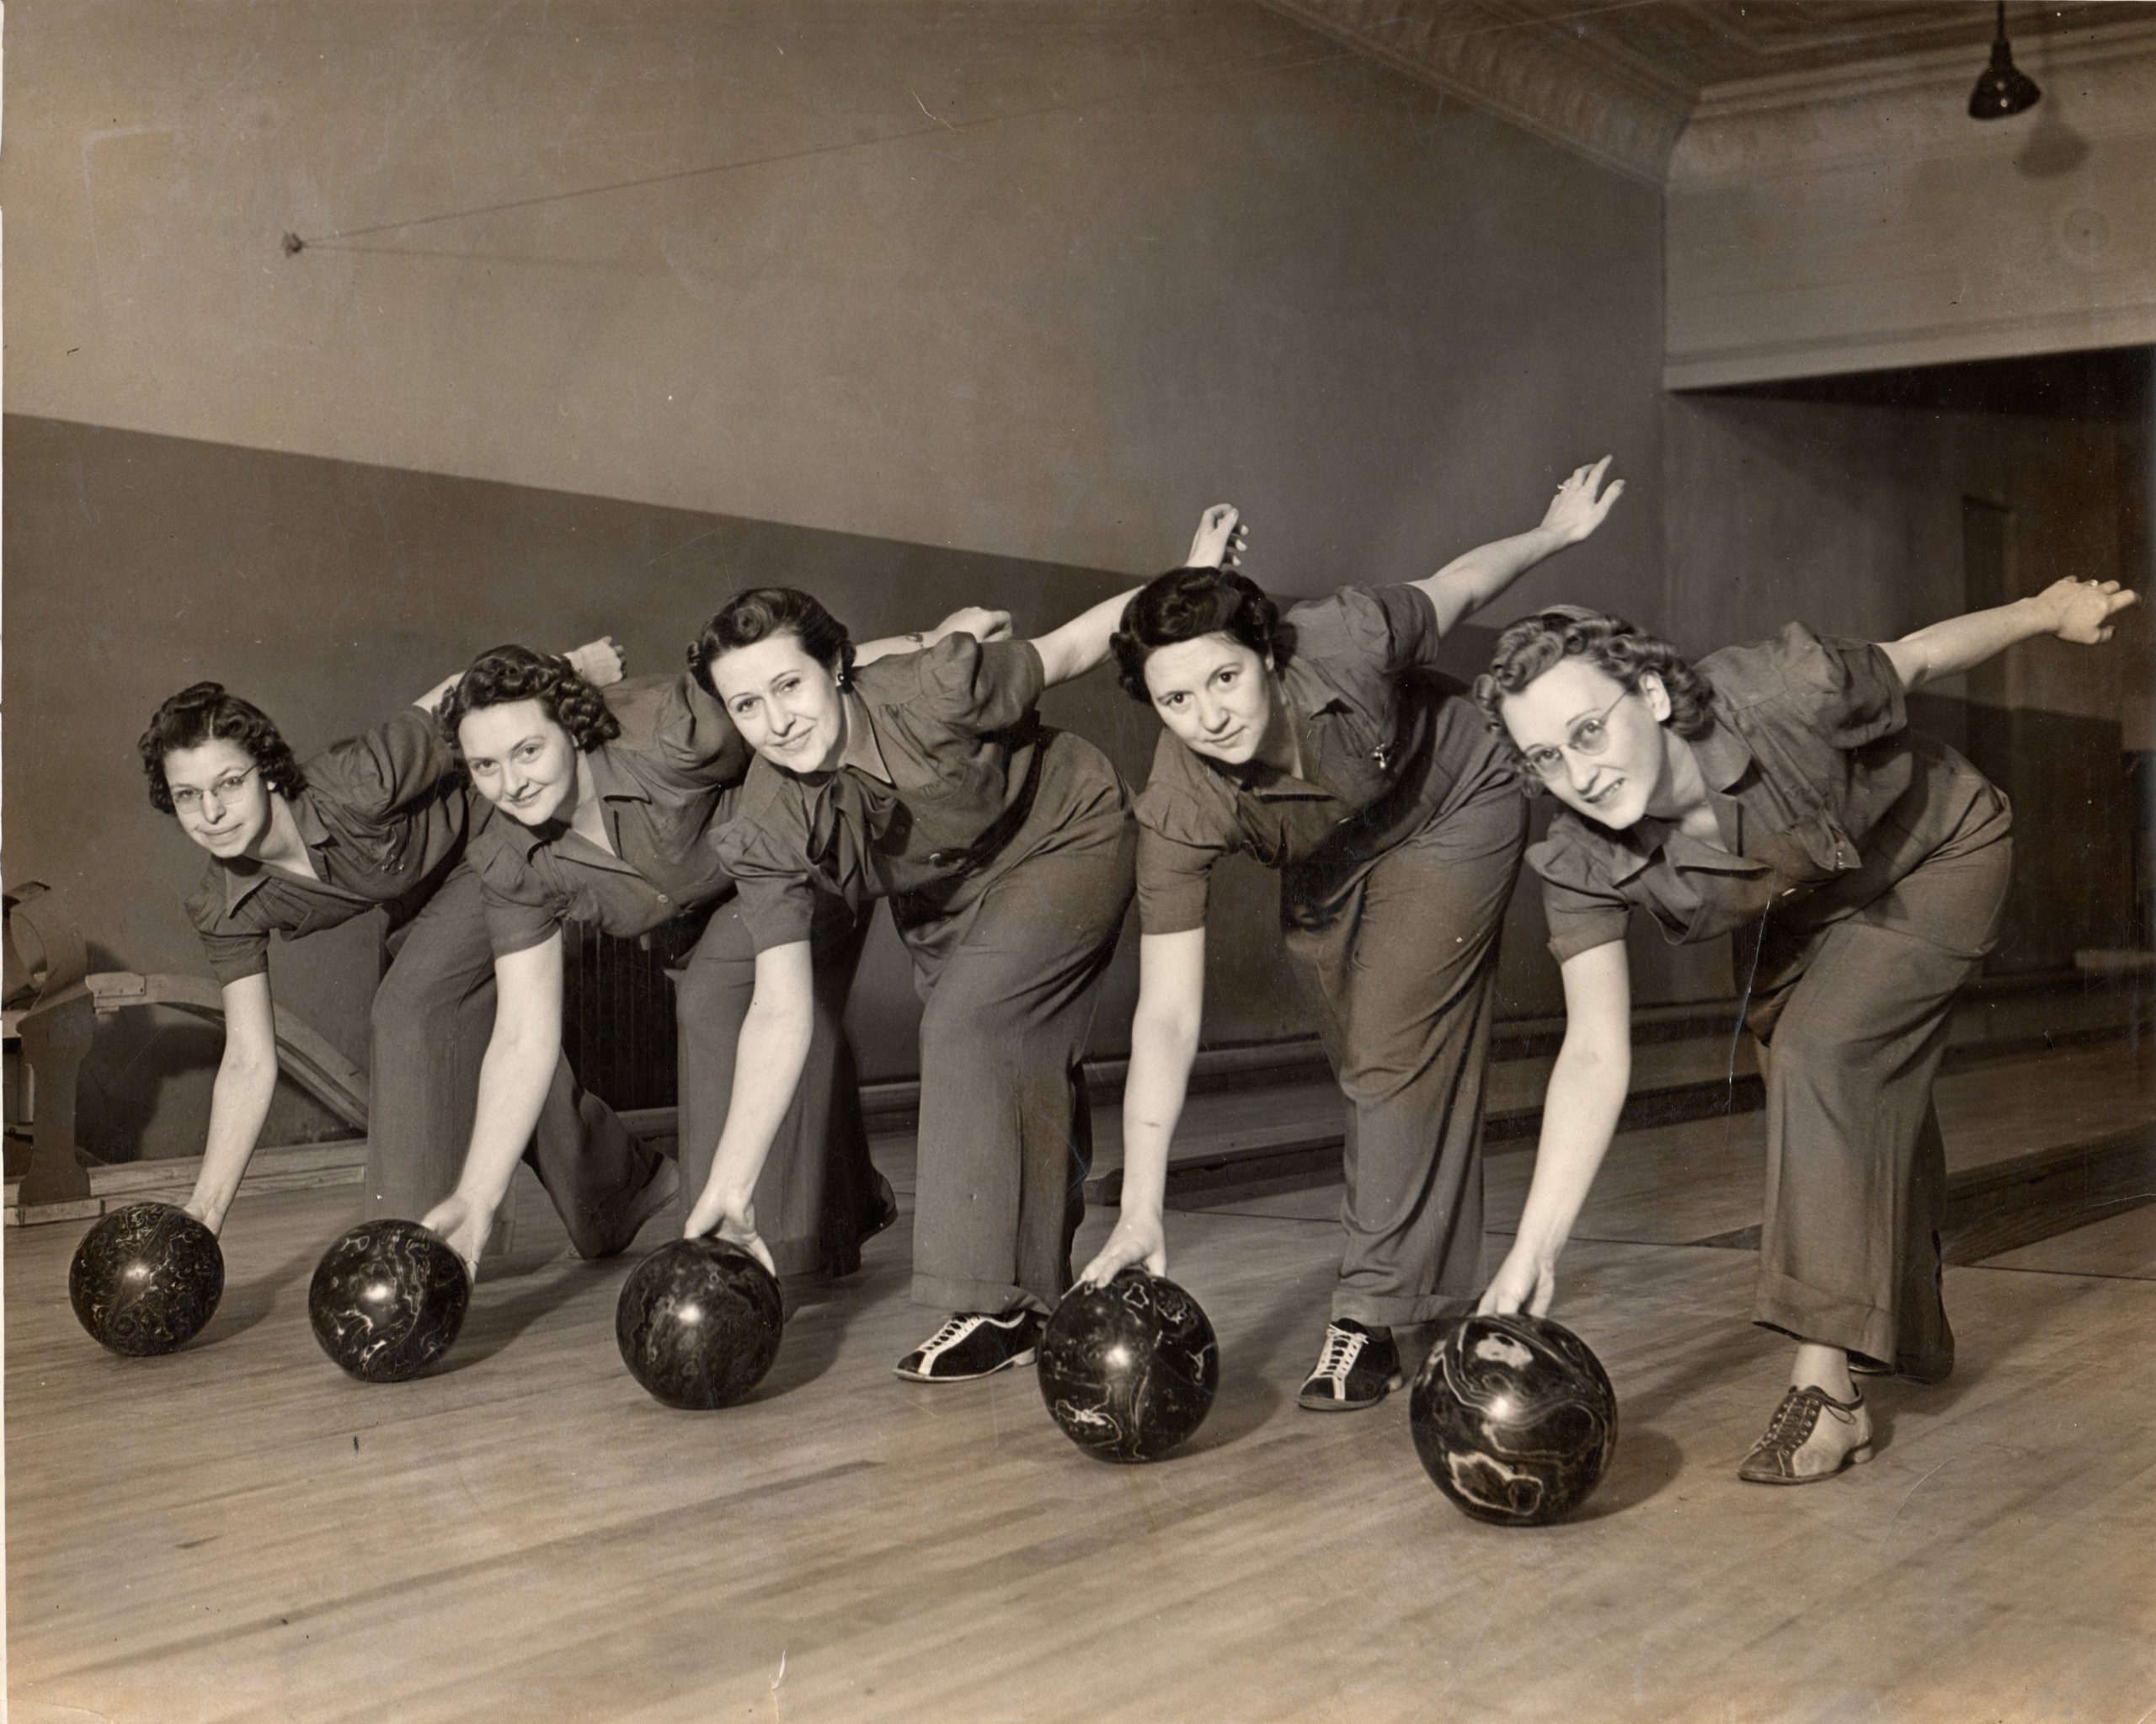 Hastings women's bowling team. Courtesy of Adams County Historical Society.